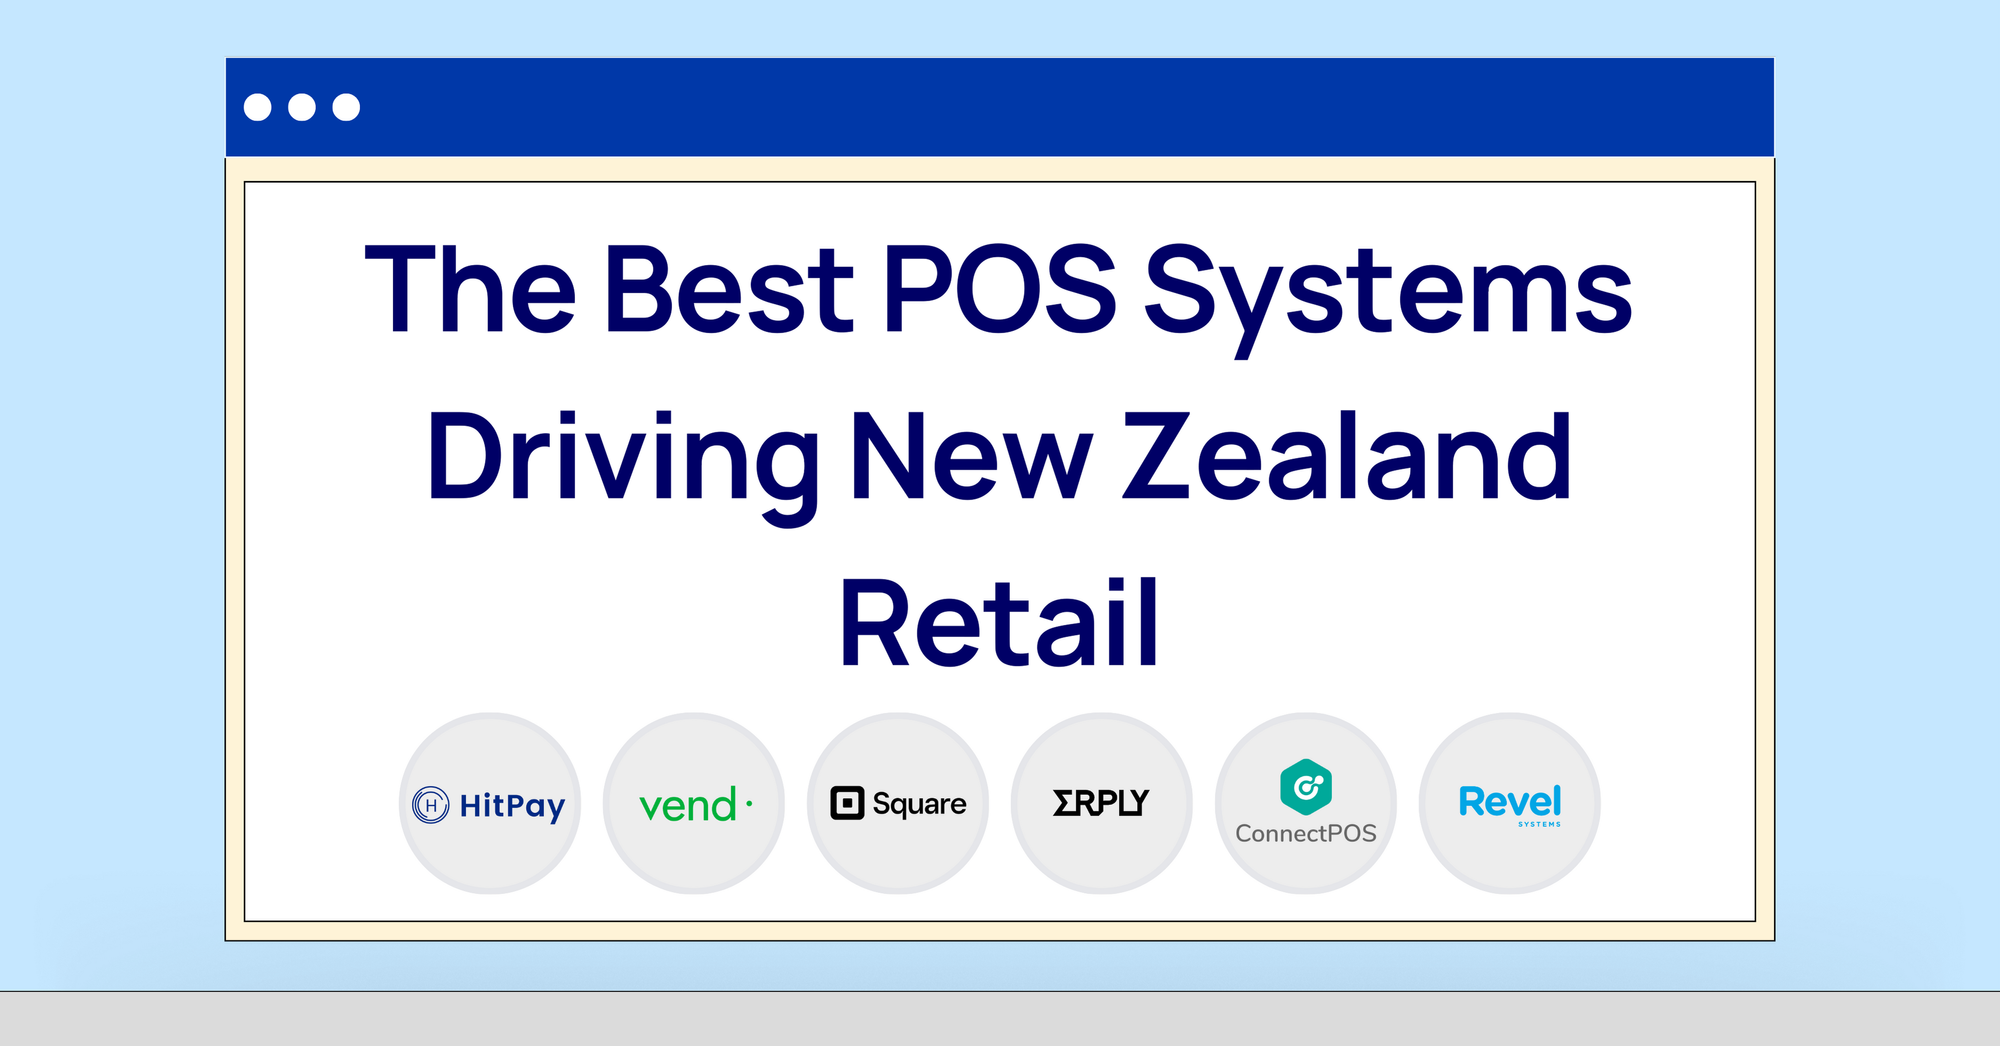 HitPay, Vend, Square, and Erply: The Best POS Systems Driving New Zealand Retail